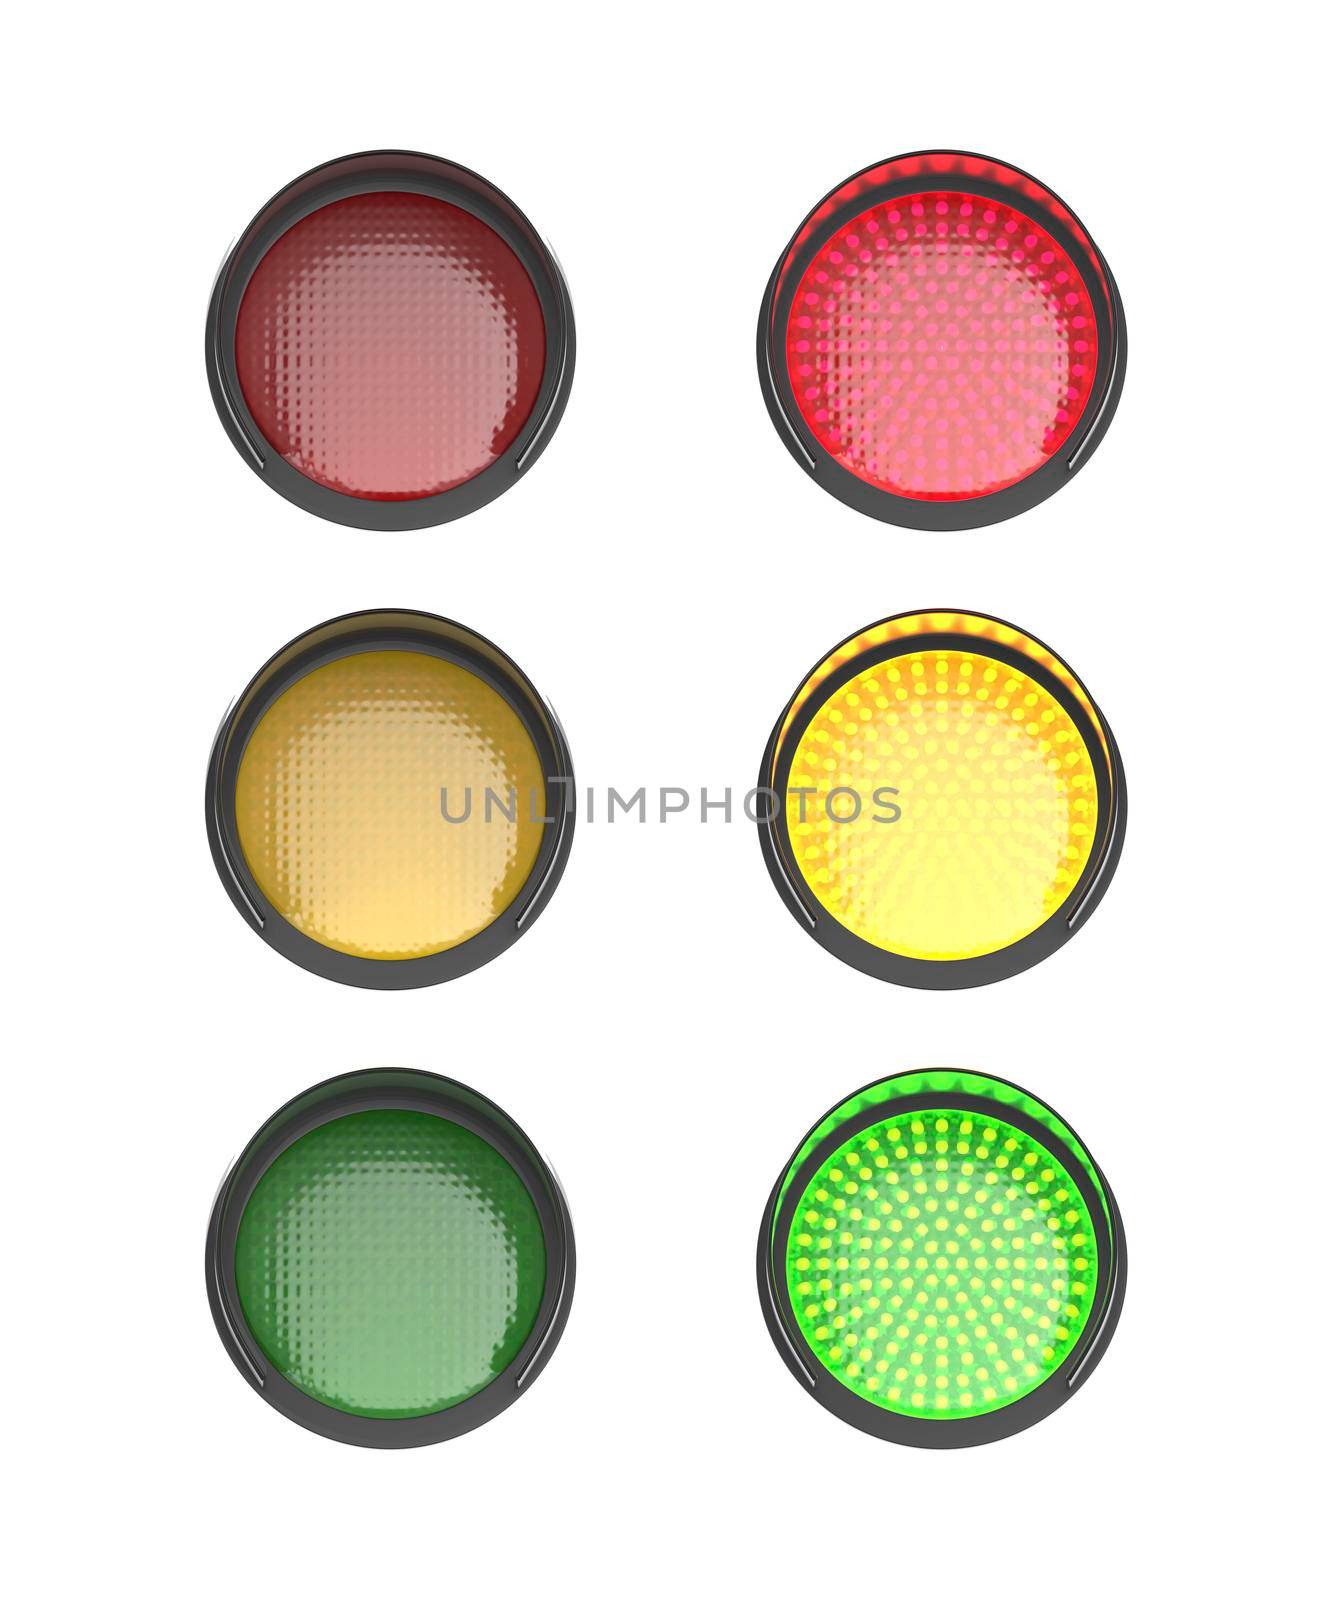 Red, yellow and green traffic lights